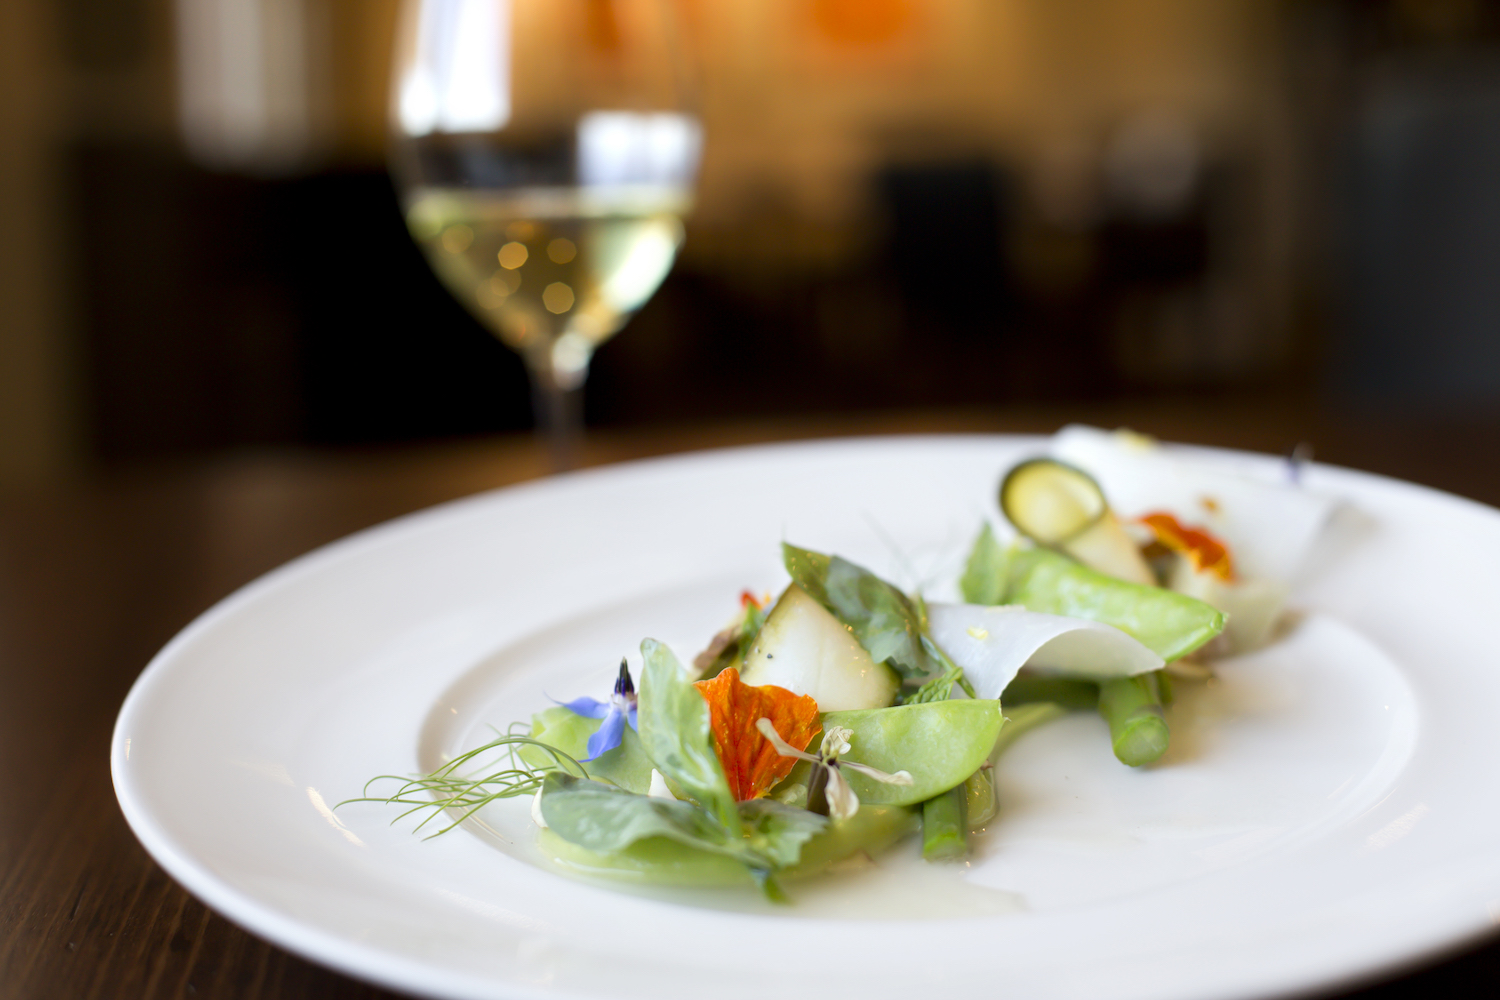 Discover perfectly paired wine and food at Appellation restaurant at The Louise